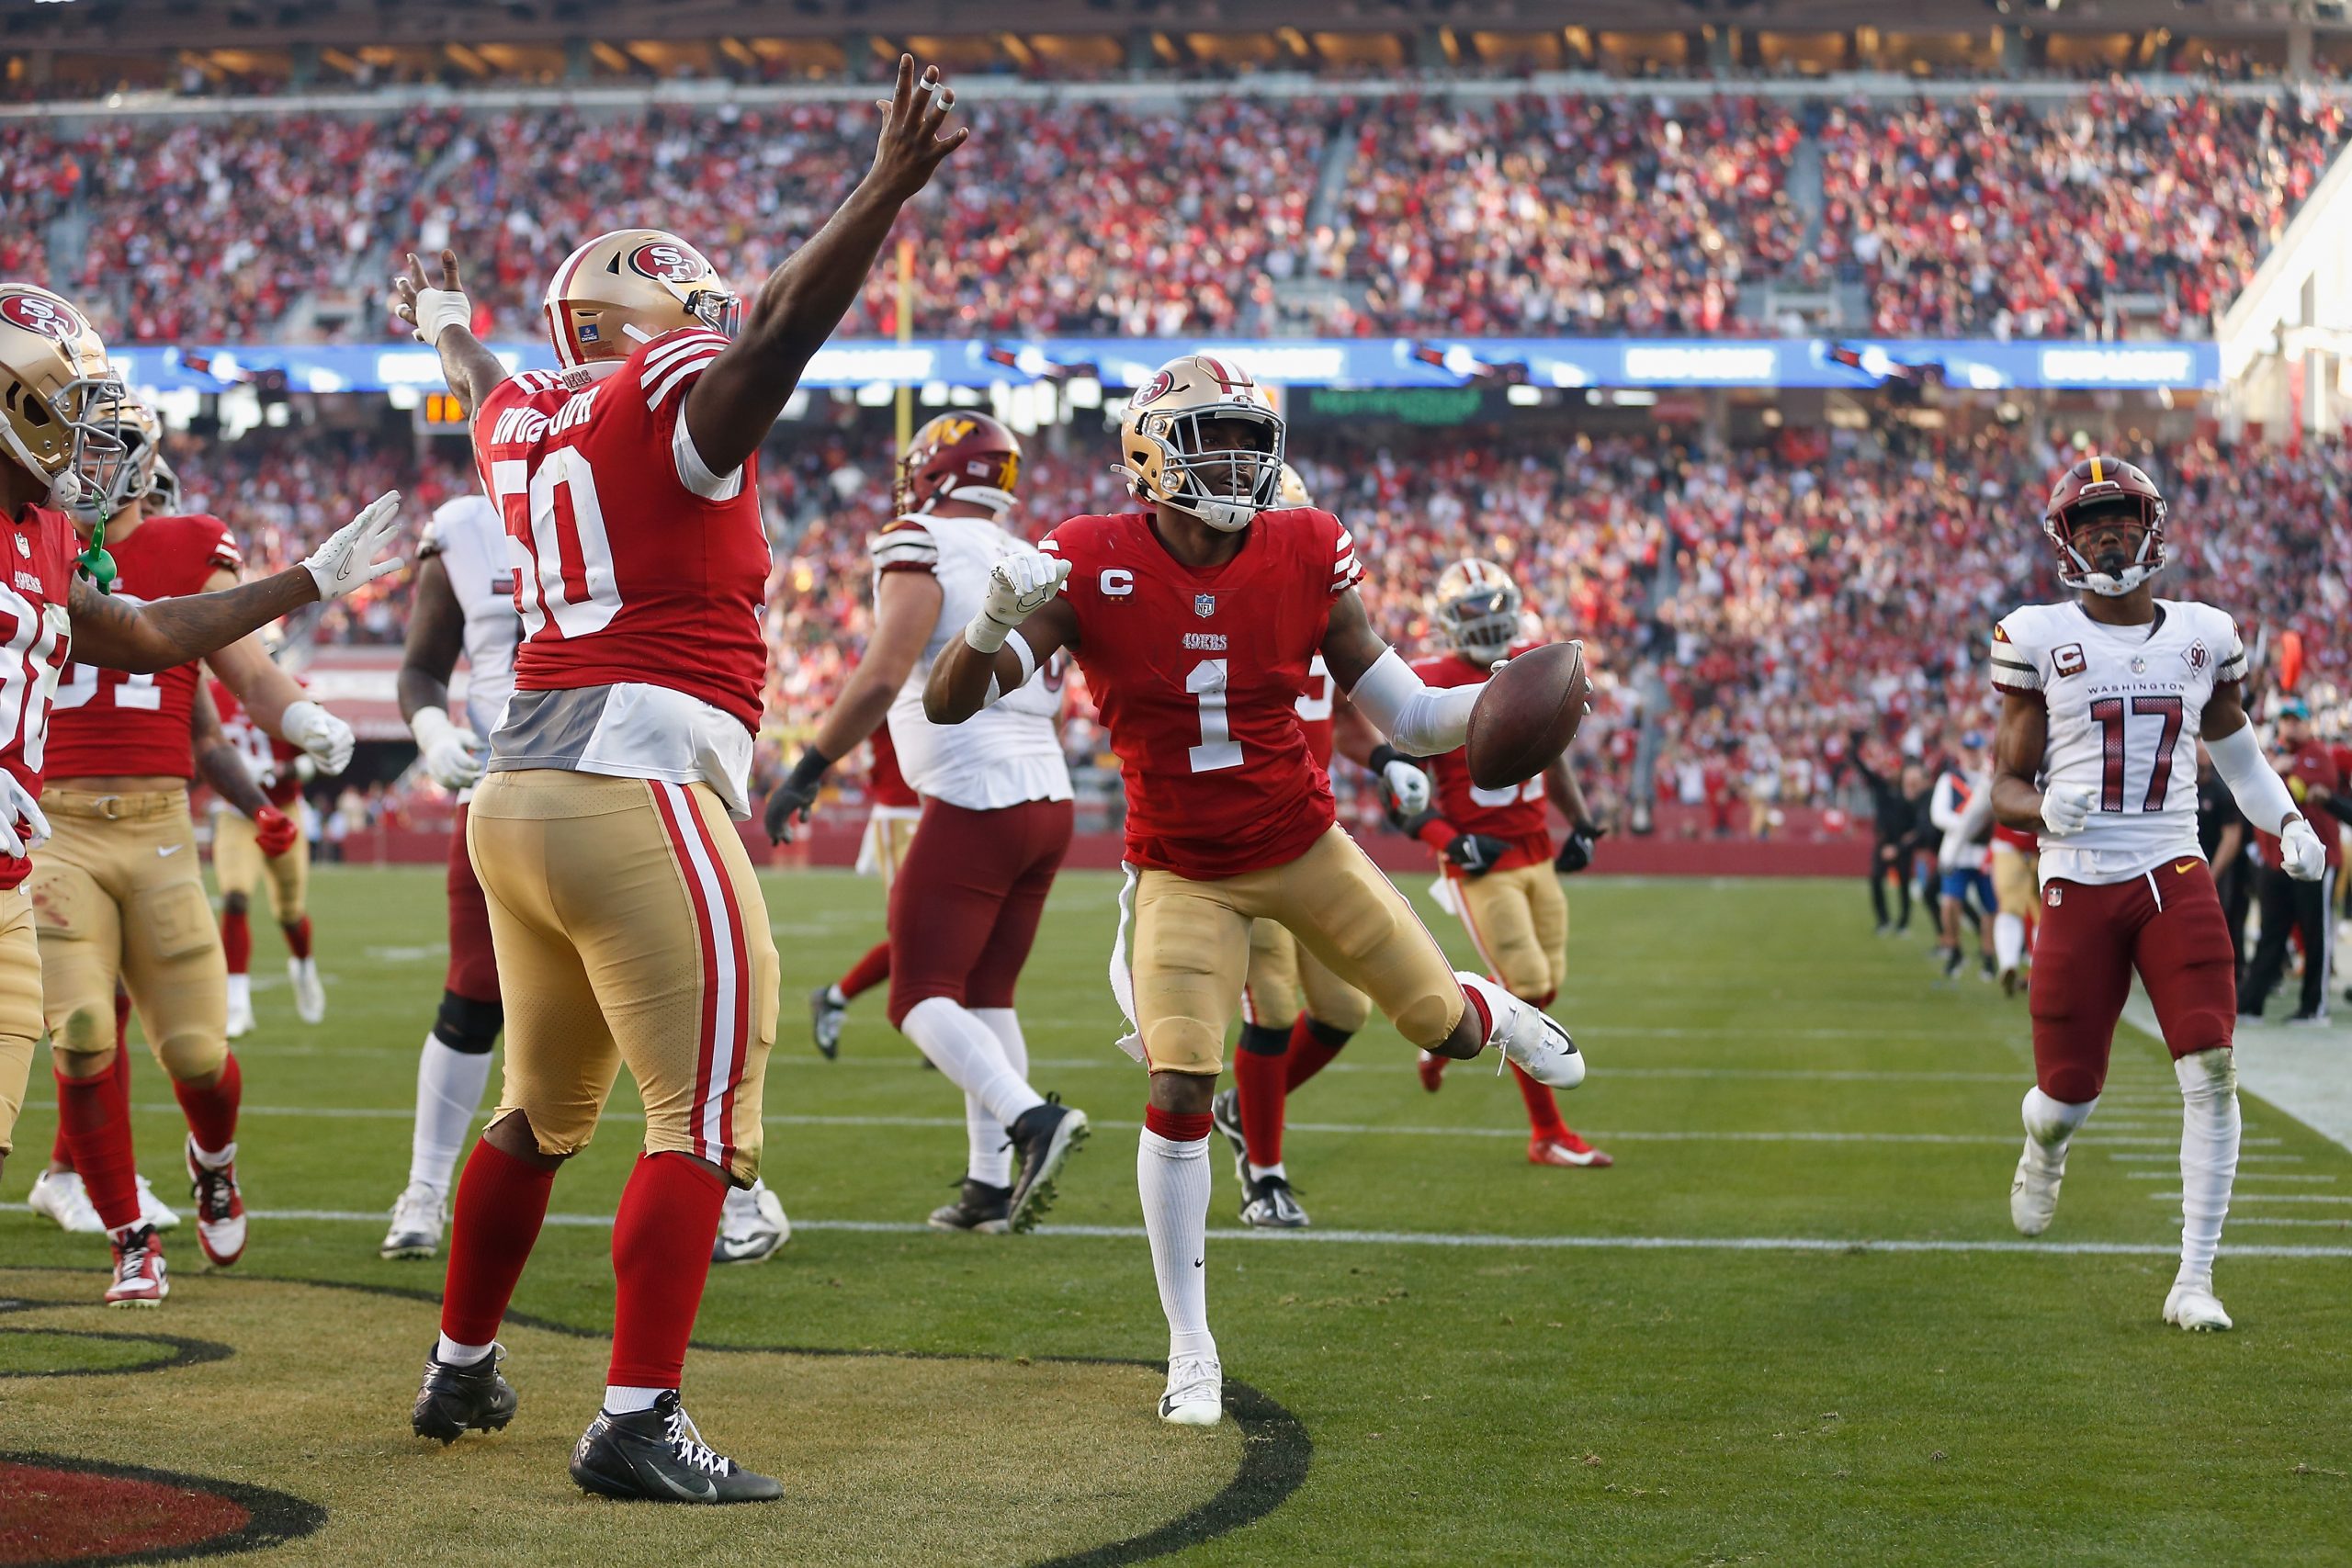 NFL playoff schedule: 49ers vs. Cowboys game time, TV channel